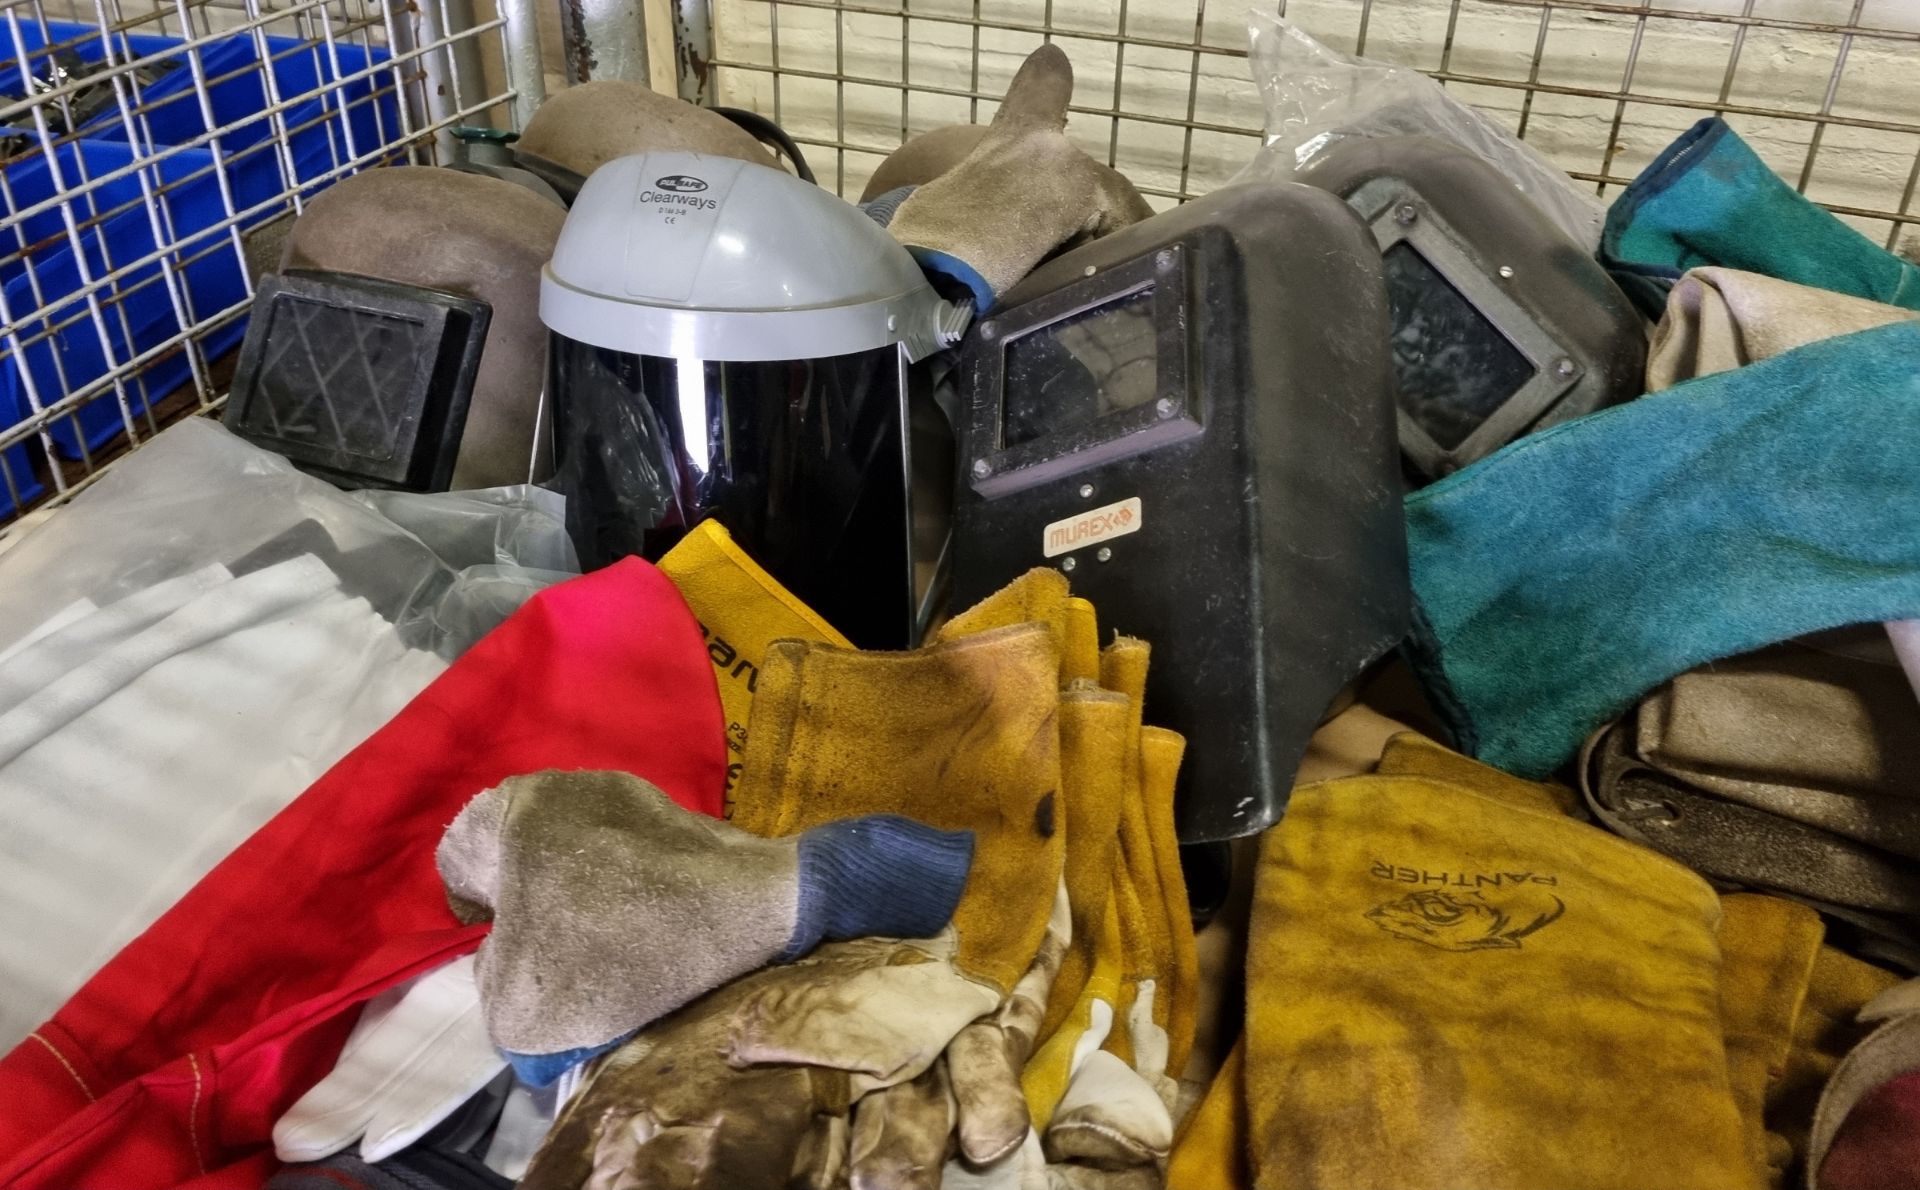 Welding PPE which includes: helmets/visors, gloves, aprons, sleeves and spare lens - Image 7 of 7